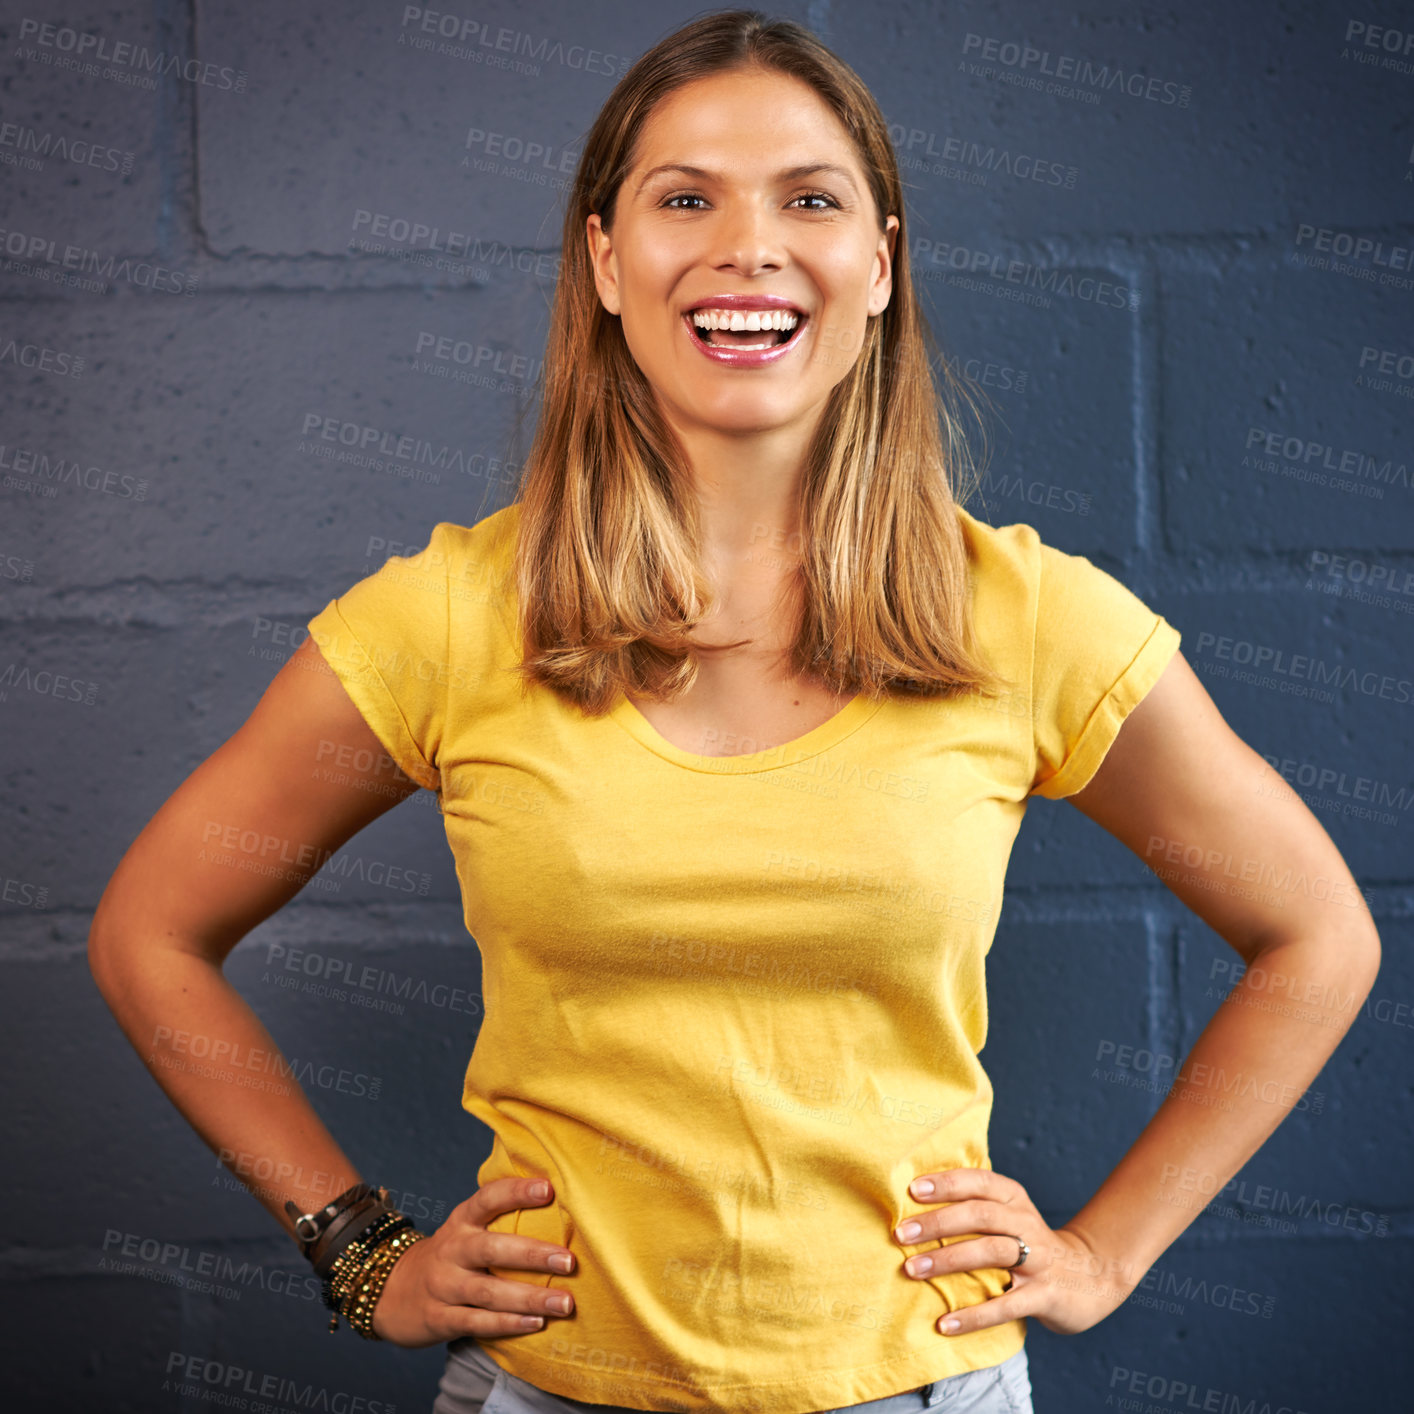 Buy stock photo Cropped portrait of a young woman posing against a brick wall background